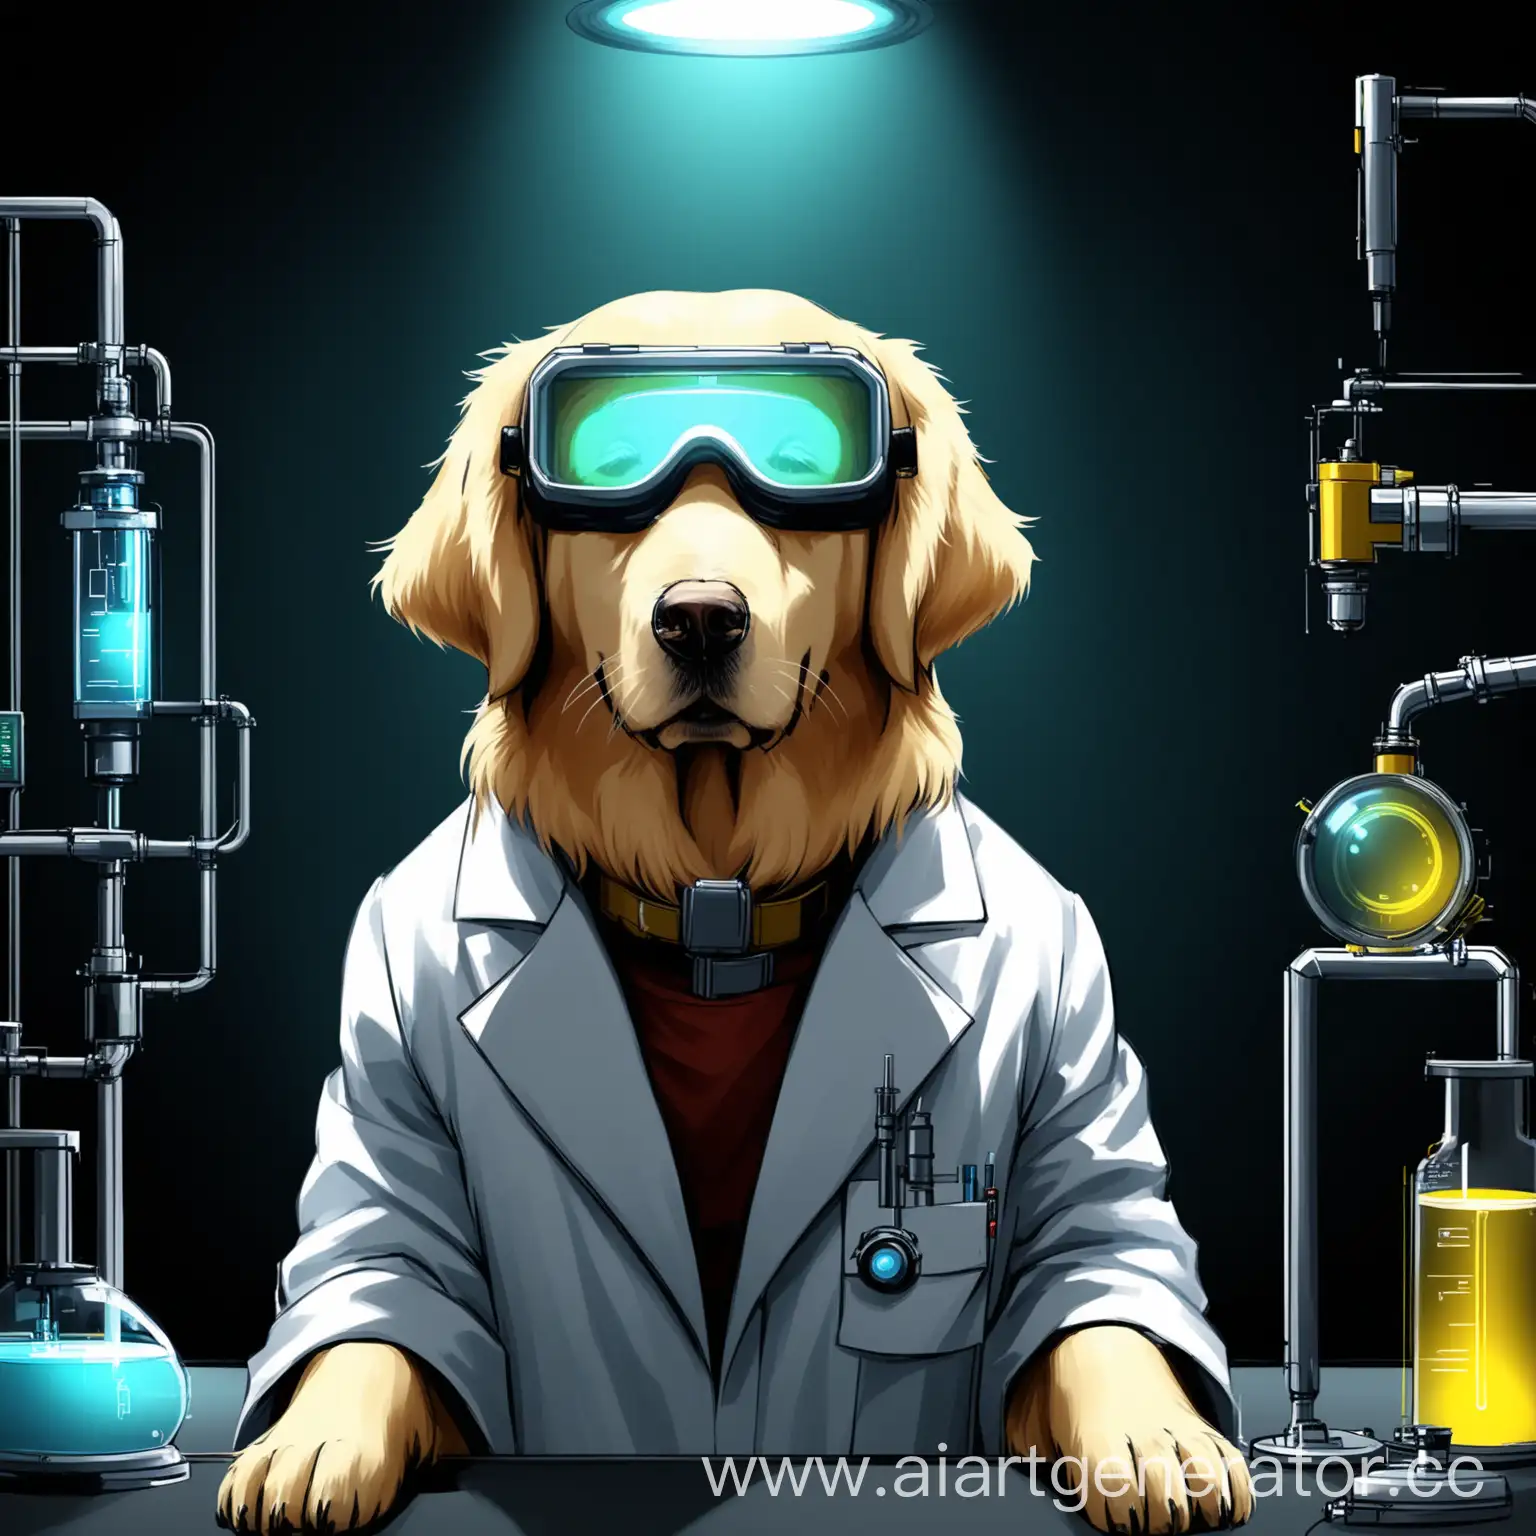 Golden-Retriever-Scientist-in-Lab-Coat-Conducting-Invention-Technology-Experiment-in-Darkness